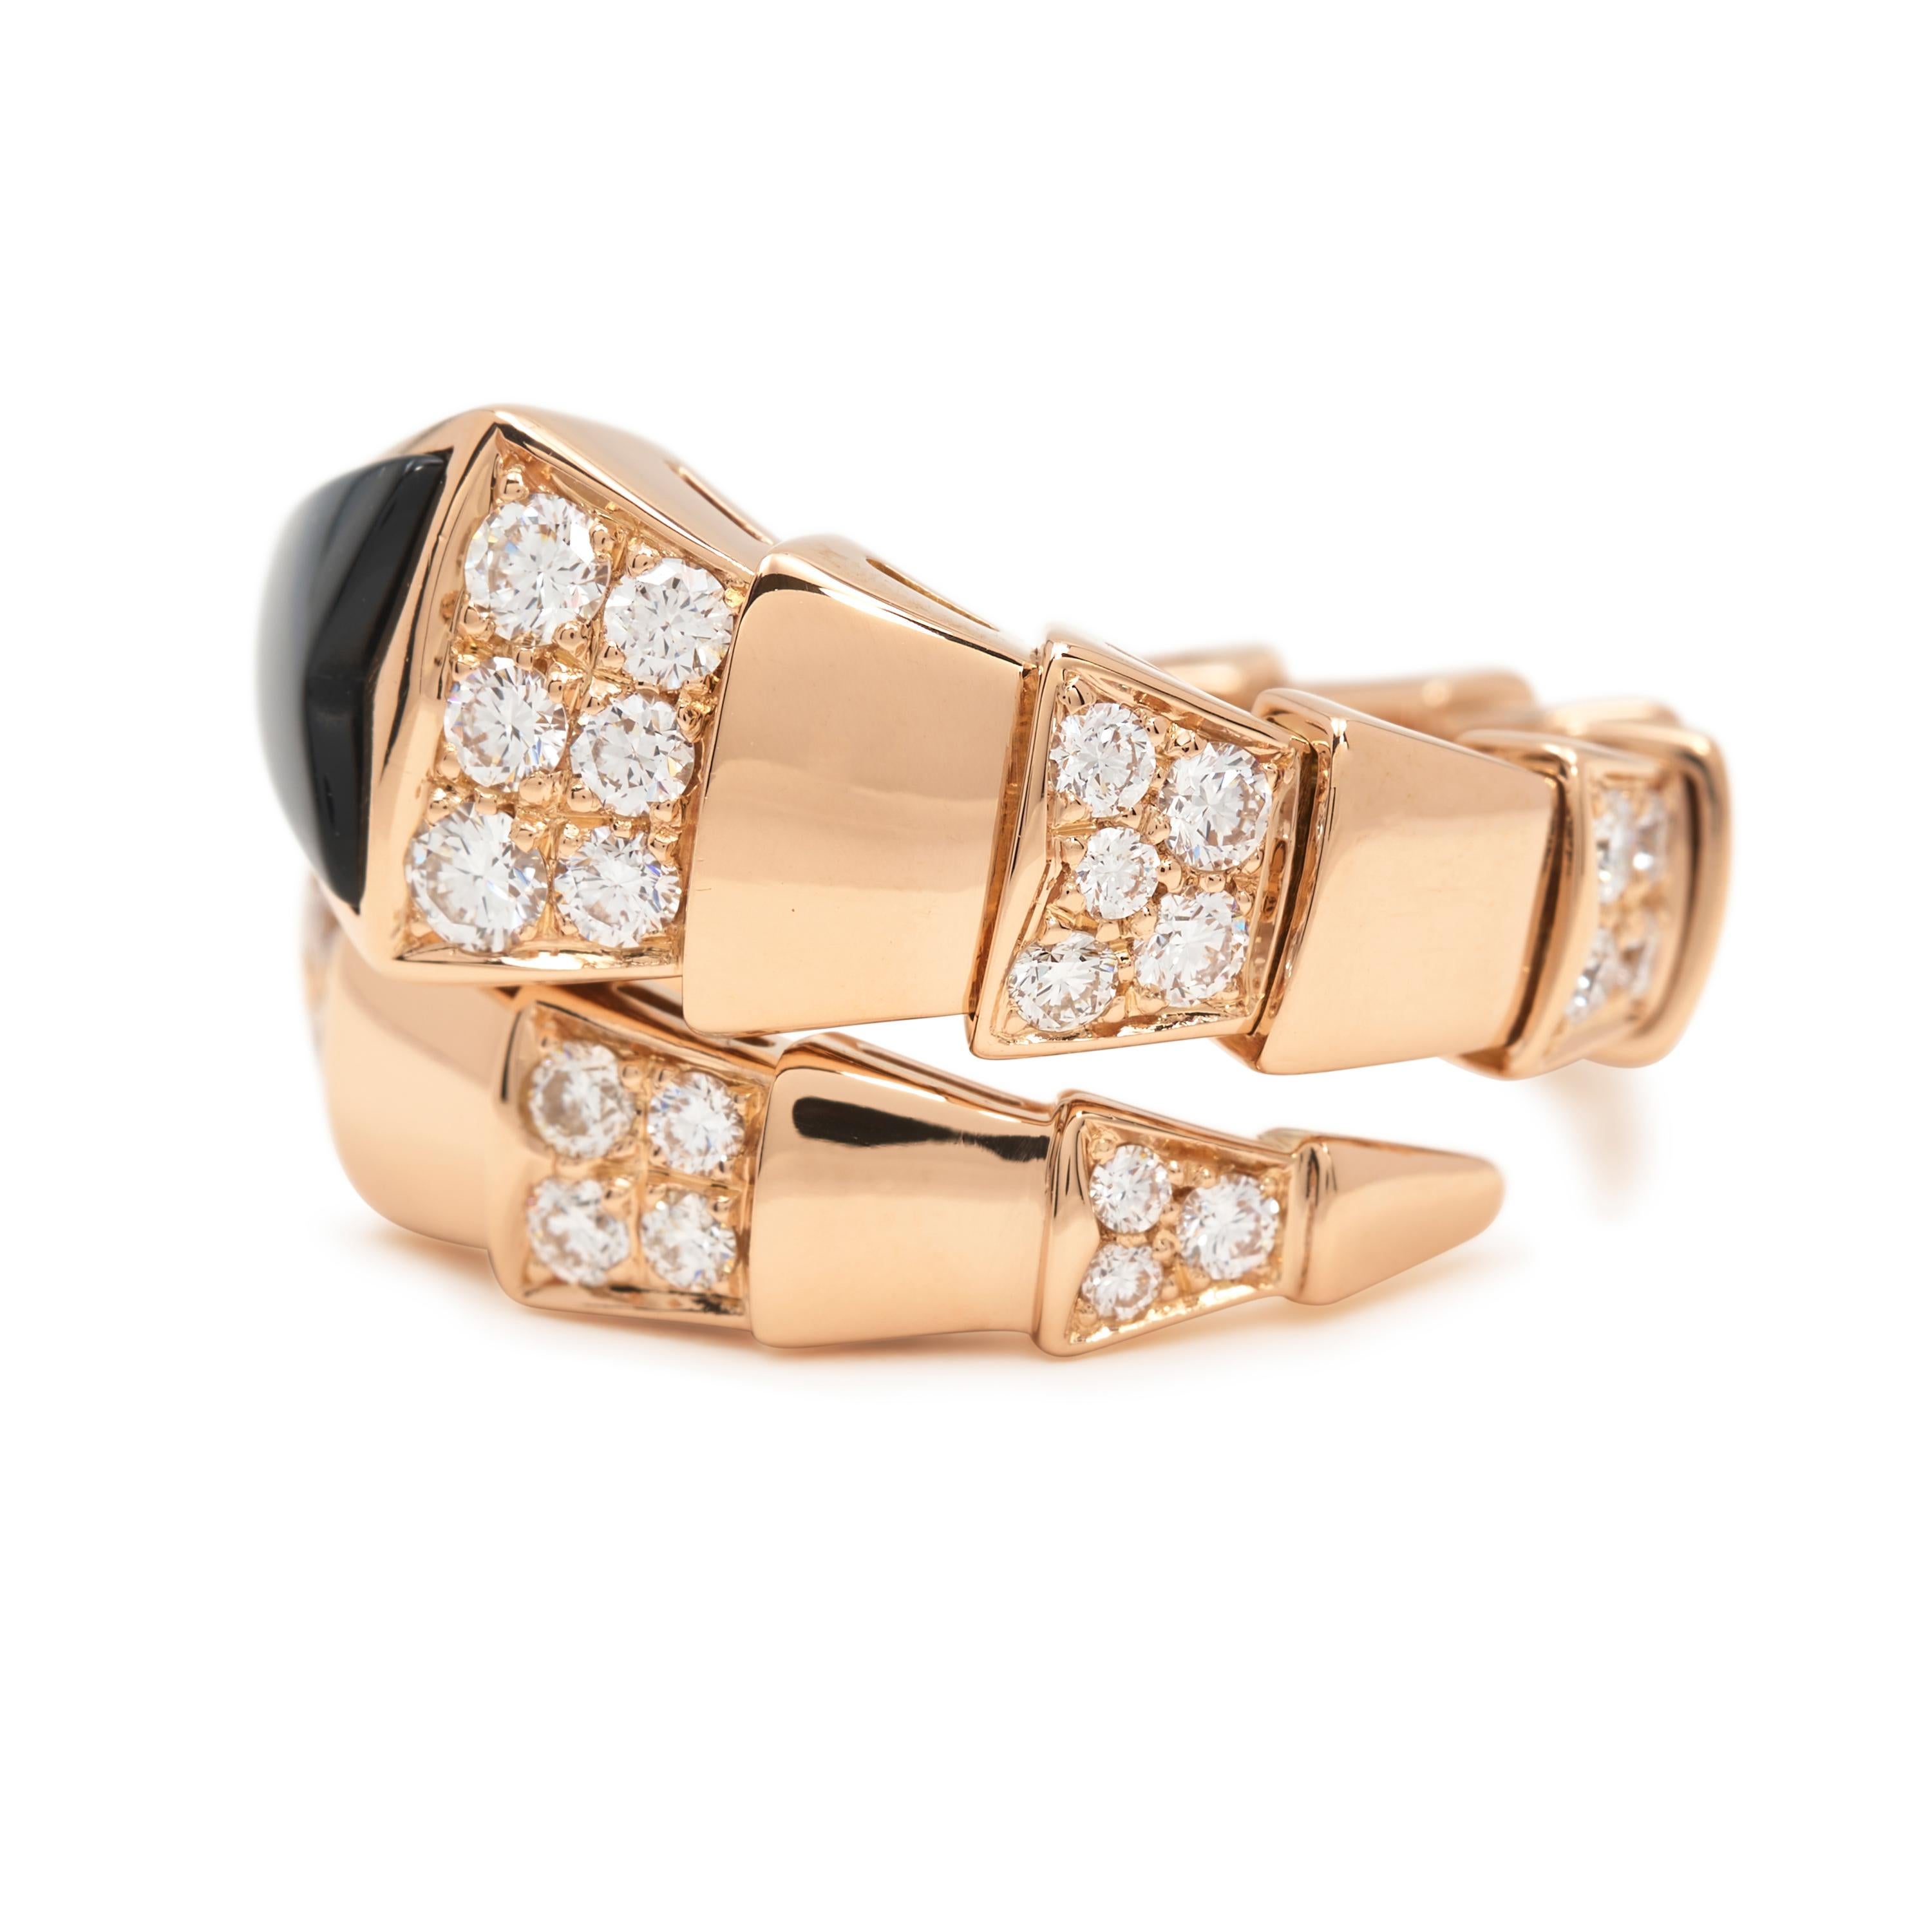 Authentic Bvlgari Serpenti Viper ring crafted in 18-karat rose gold. The serpentine design coils around the finger and features pavé set diamonds of an estimated .83 total carats on alternating scales. The ring is finished with a carved onyx head.